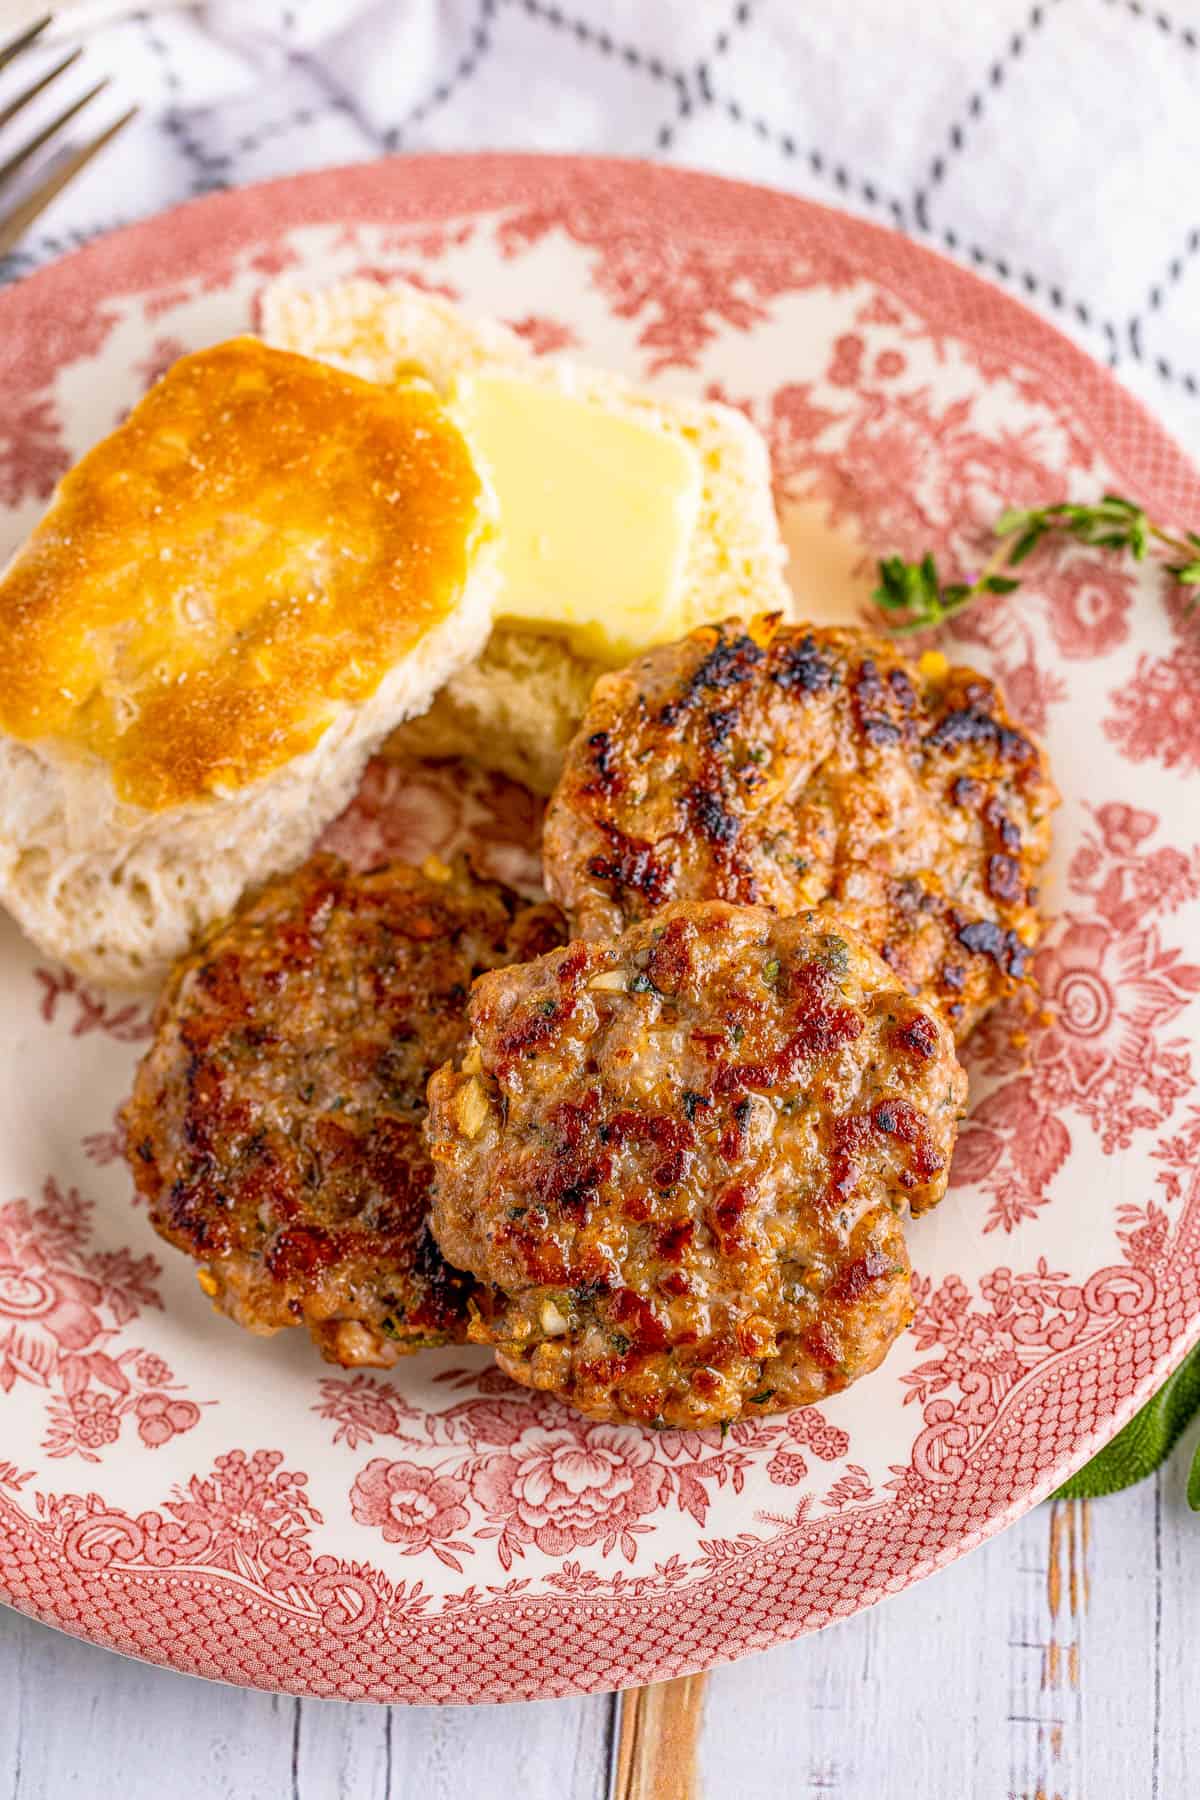 Overhead plate of Breakfast Sausage Recipe with biscuit and butter.